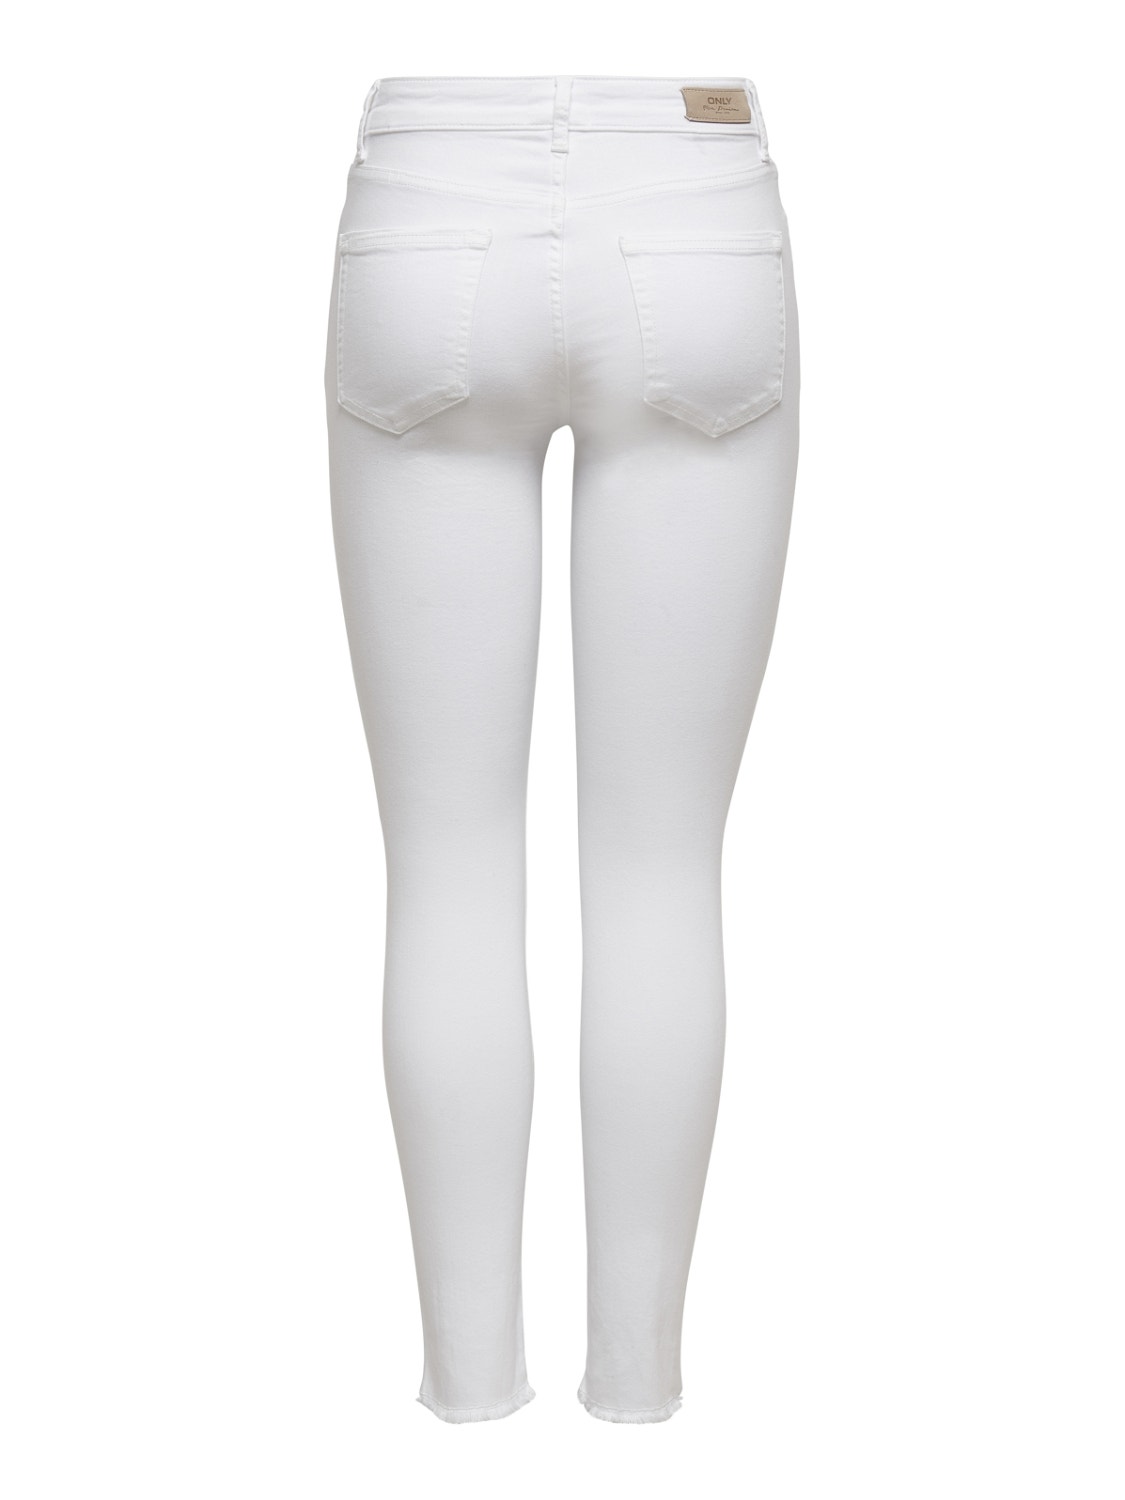 ONLY ONLBlush mid ankle Jean skinny -White - 15155438